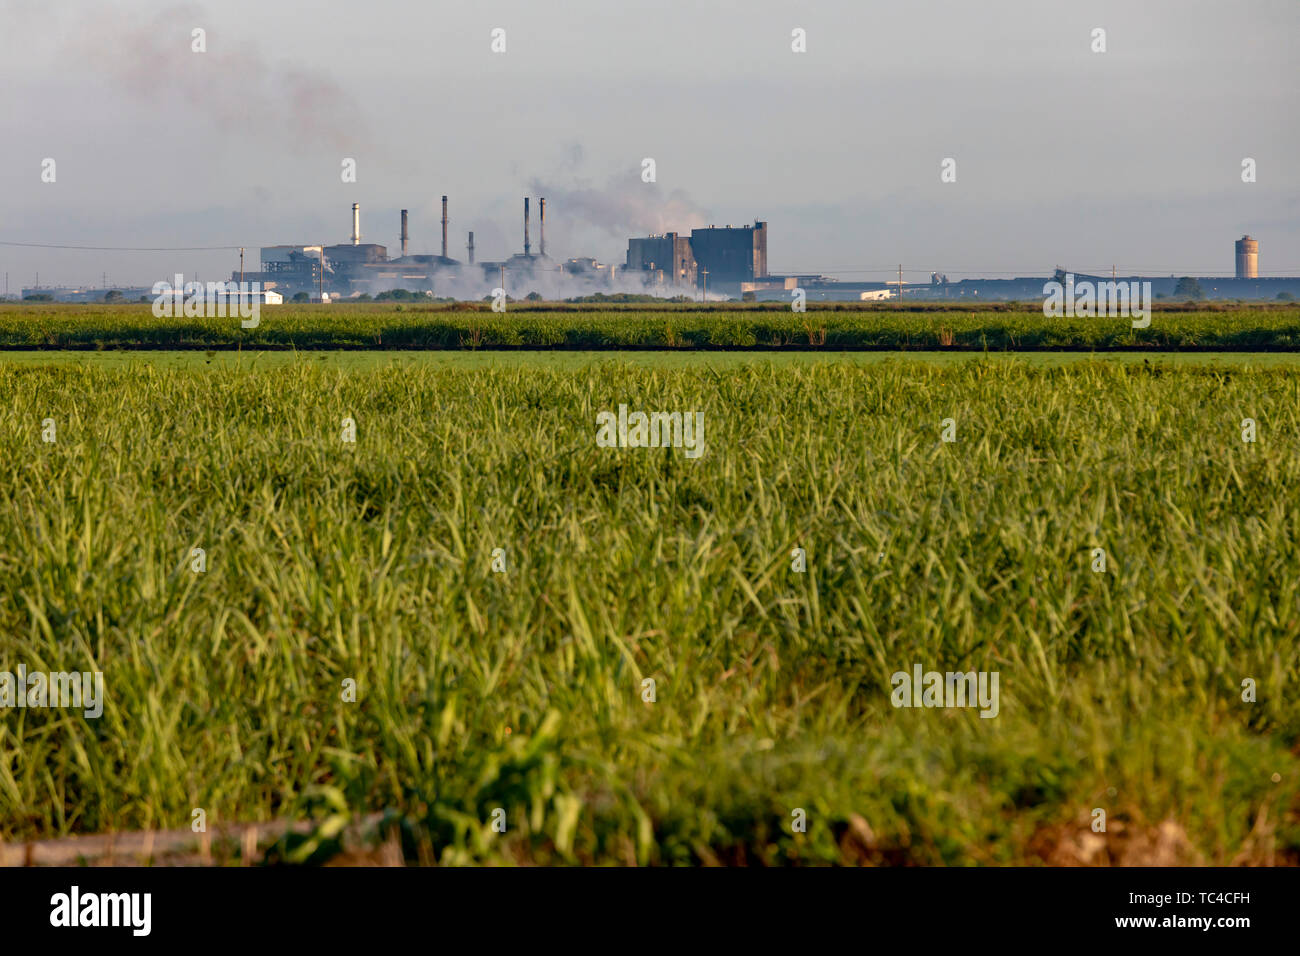 Clewiston, Florida - A sugar cane field and, in the distance, U.S. Sugar's Clewiston Sugar House refinery and its electric generating station, which b Stock Photo